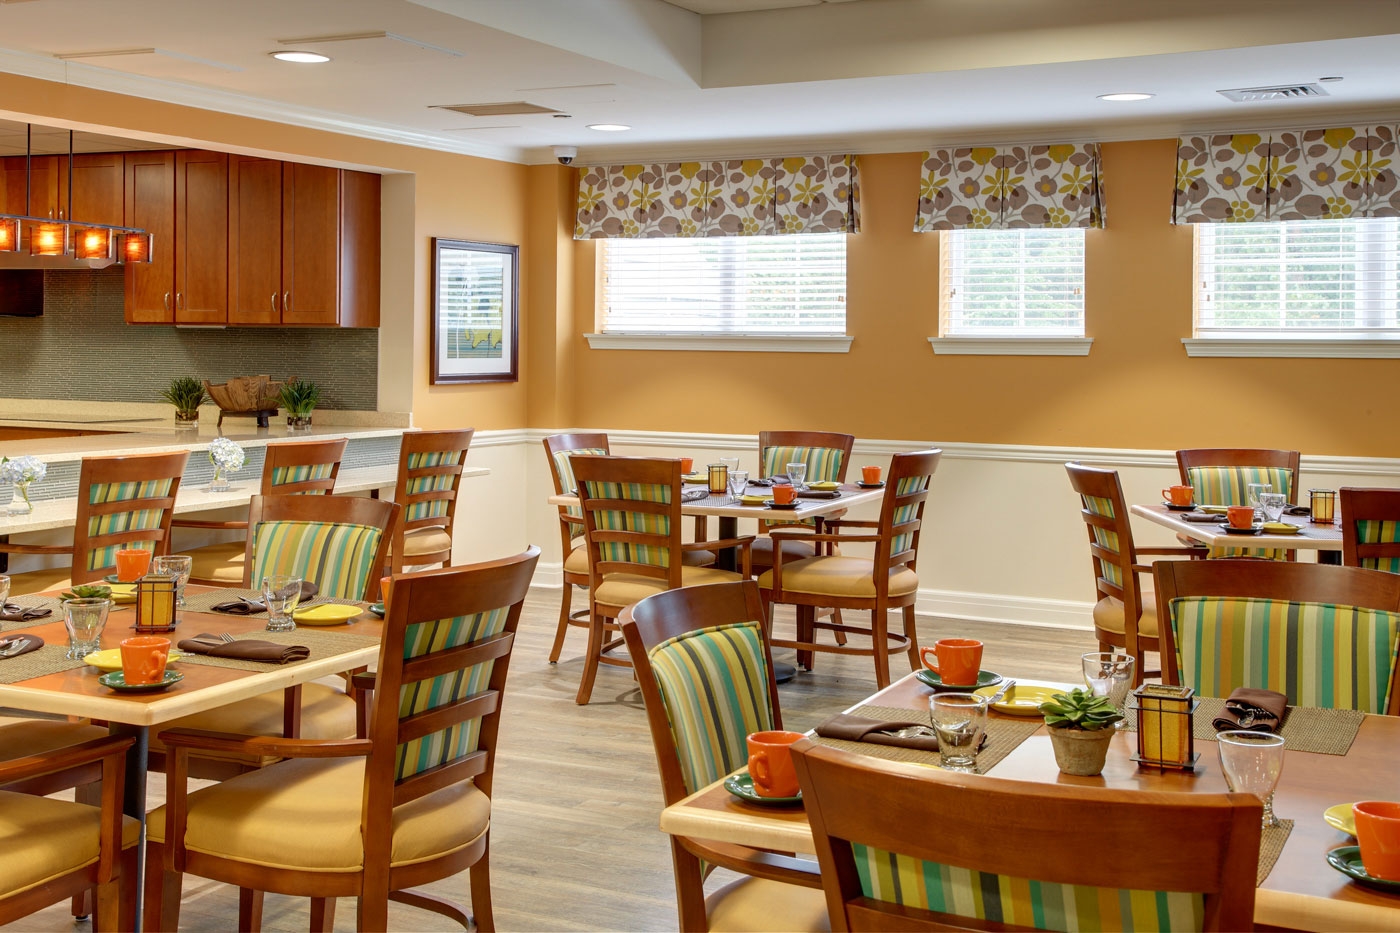 Our bright and cheerful interior design for a dining area inside an assisted living/memory care community.